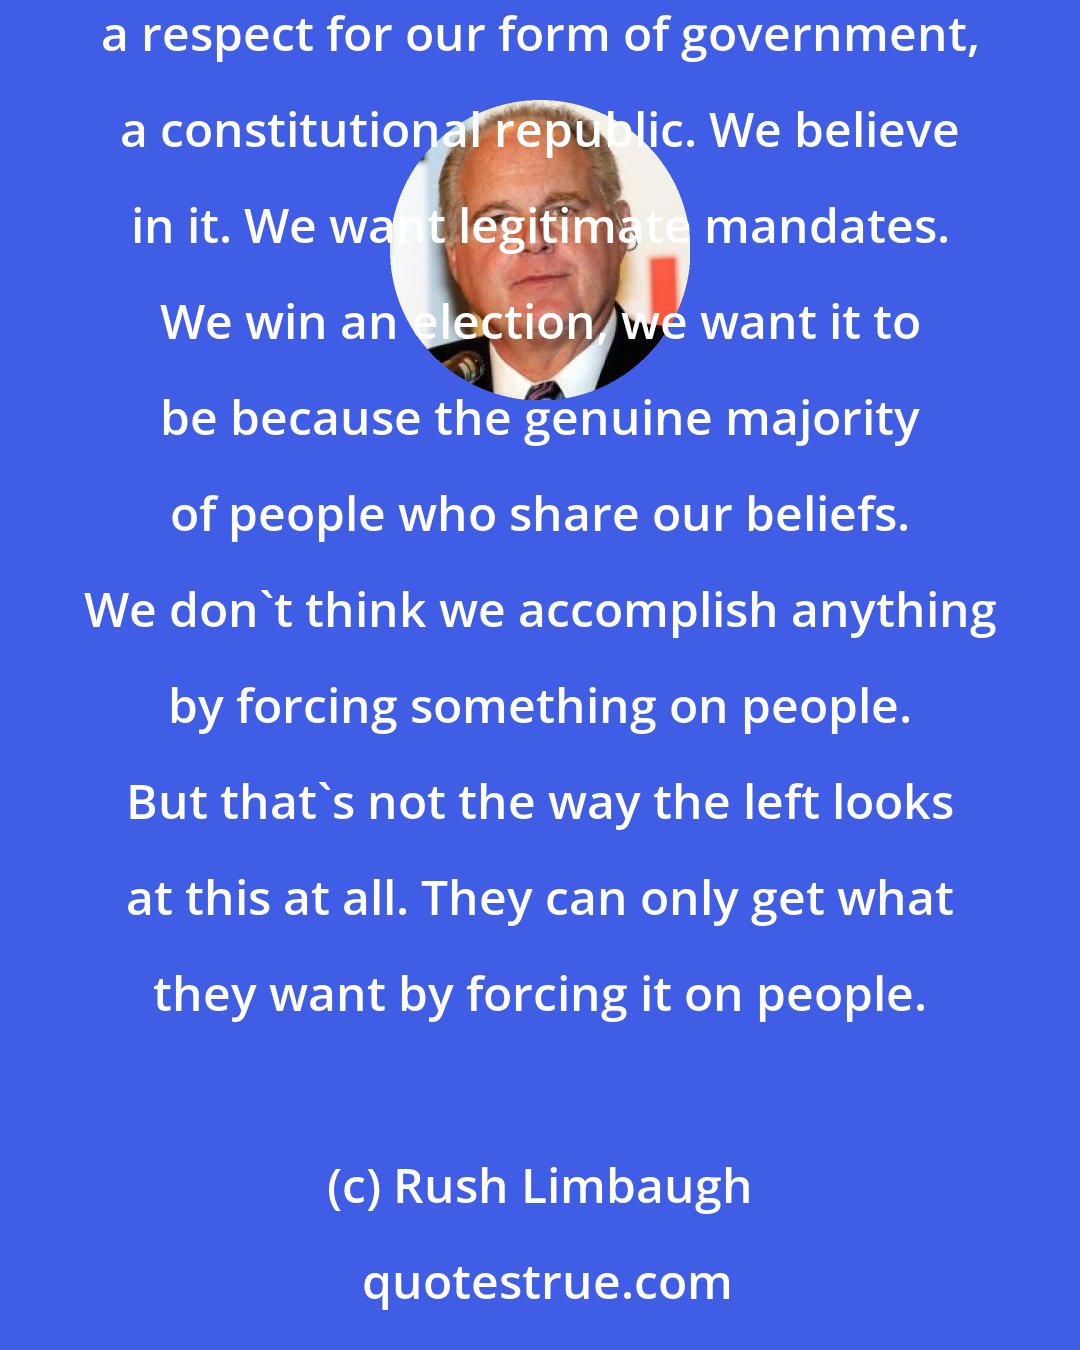 Rush Limbaugh: We do not force things on people. That's not how we want things to eventuate. That's not how we want things to happen. We have what we consider to be, anyway, a respect for our form of government, a constitutional republic. We believe in it. We want legitimate mandates. We win an election, we want it to be because the genuine majority of people who share our beliefs. We don't think we accomplish anything by forcing something on people. But that's not the way the left looks at this at all. They can only get what they want by forcing it on people.